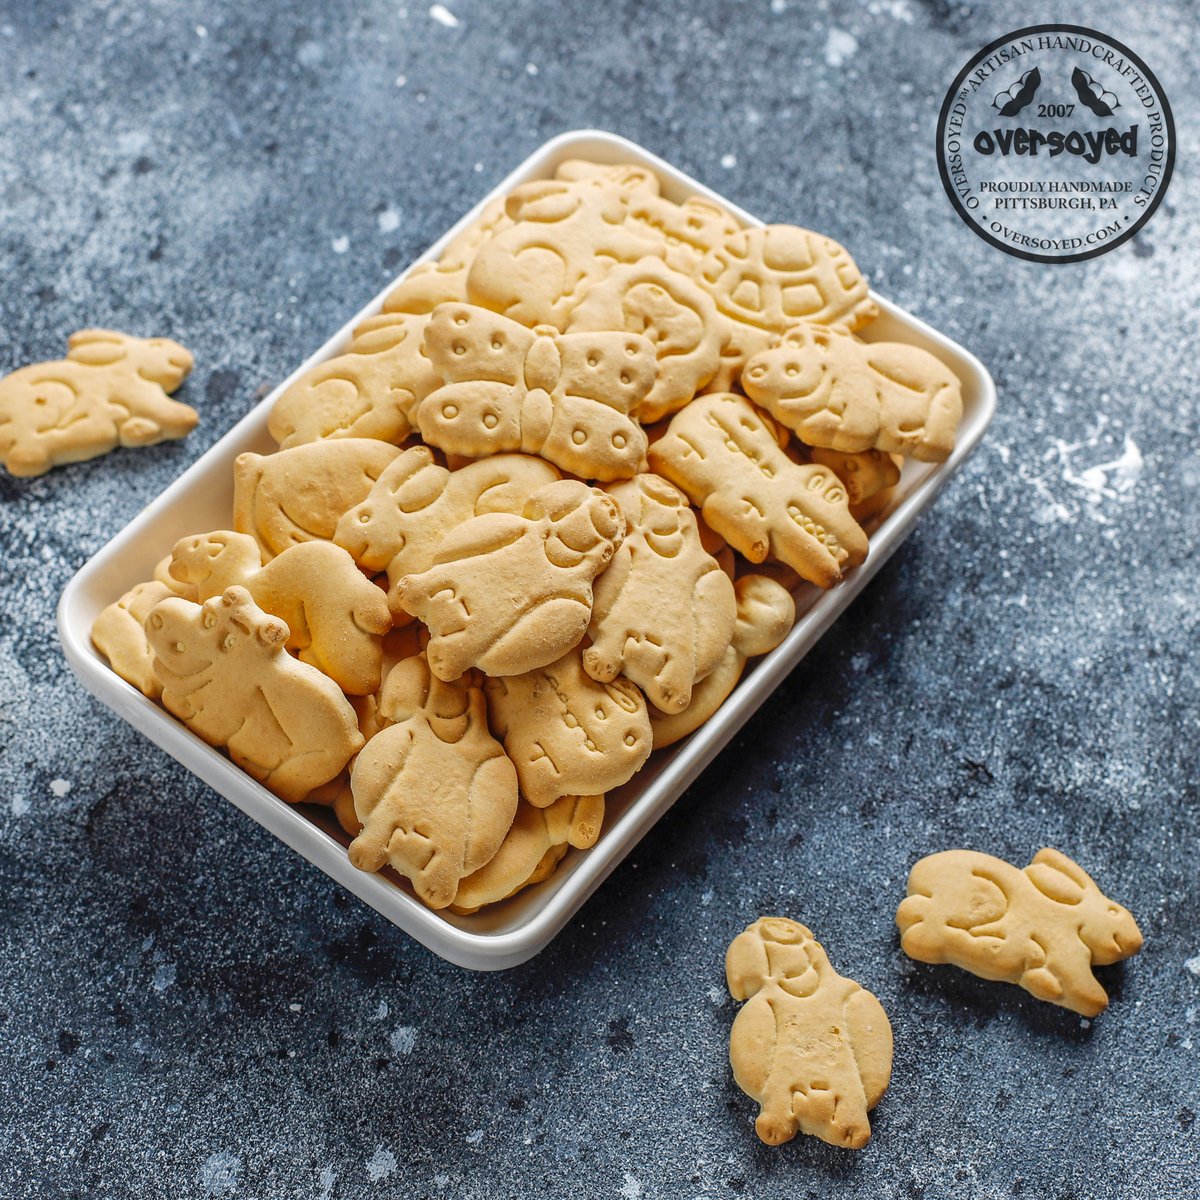 🐯 #NationalAnimalCrackerDay 🐒

oversoyed.com/collections/na…

#AnimalCrackerDay #AnimalCrackers #OverSoyed #Handmade #Natural #SkinCare #ShopLocal #Selfcare #SupportSmallBusiness #ShopSmall #Scent #Handcrafted #Candles #Perfume #Hair #Bath #Artisan #Fragrance #Grooming #Cologne